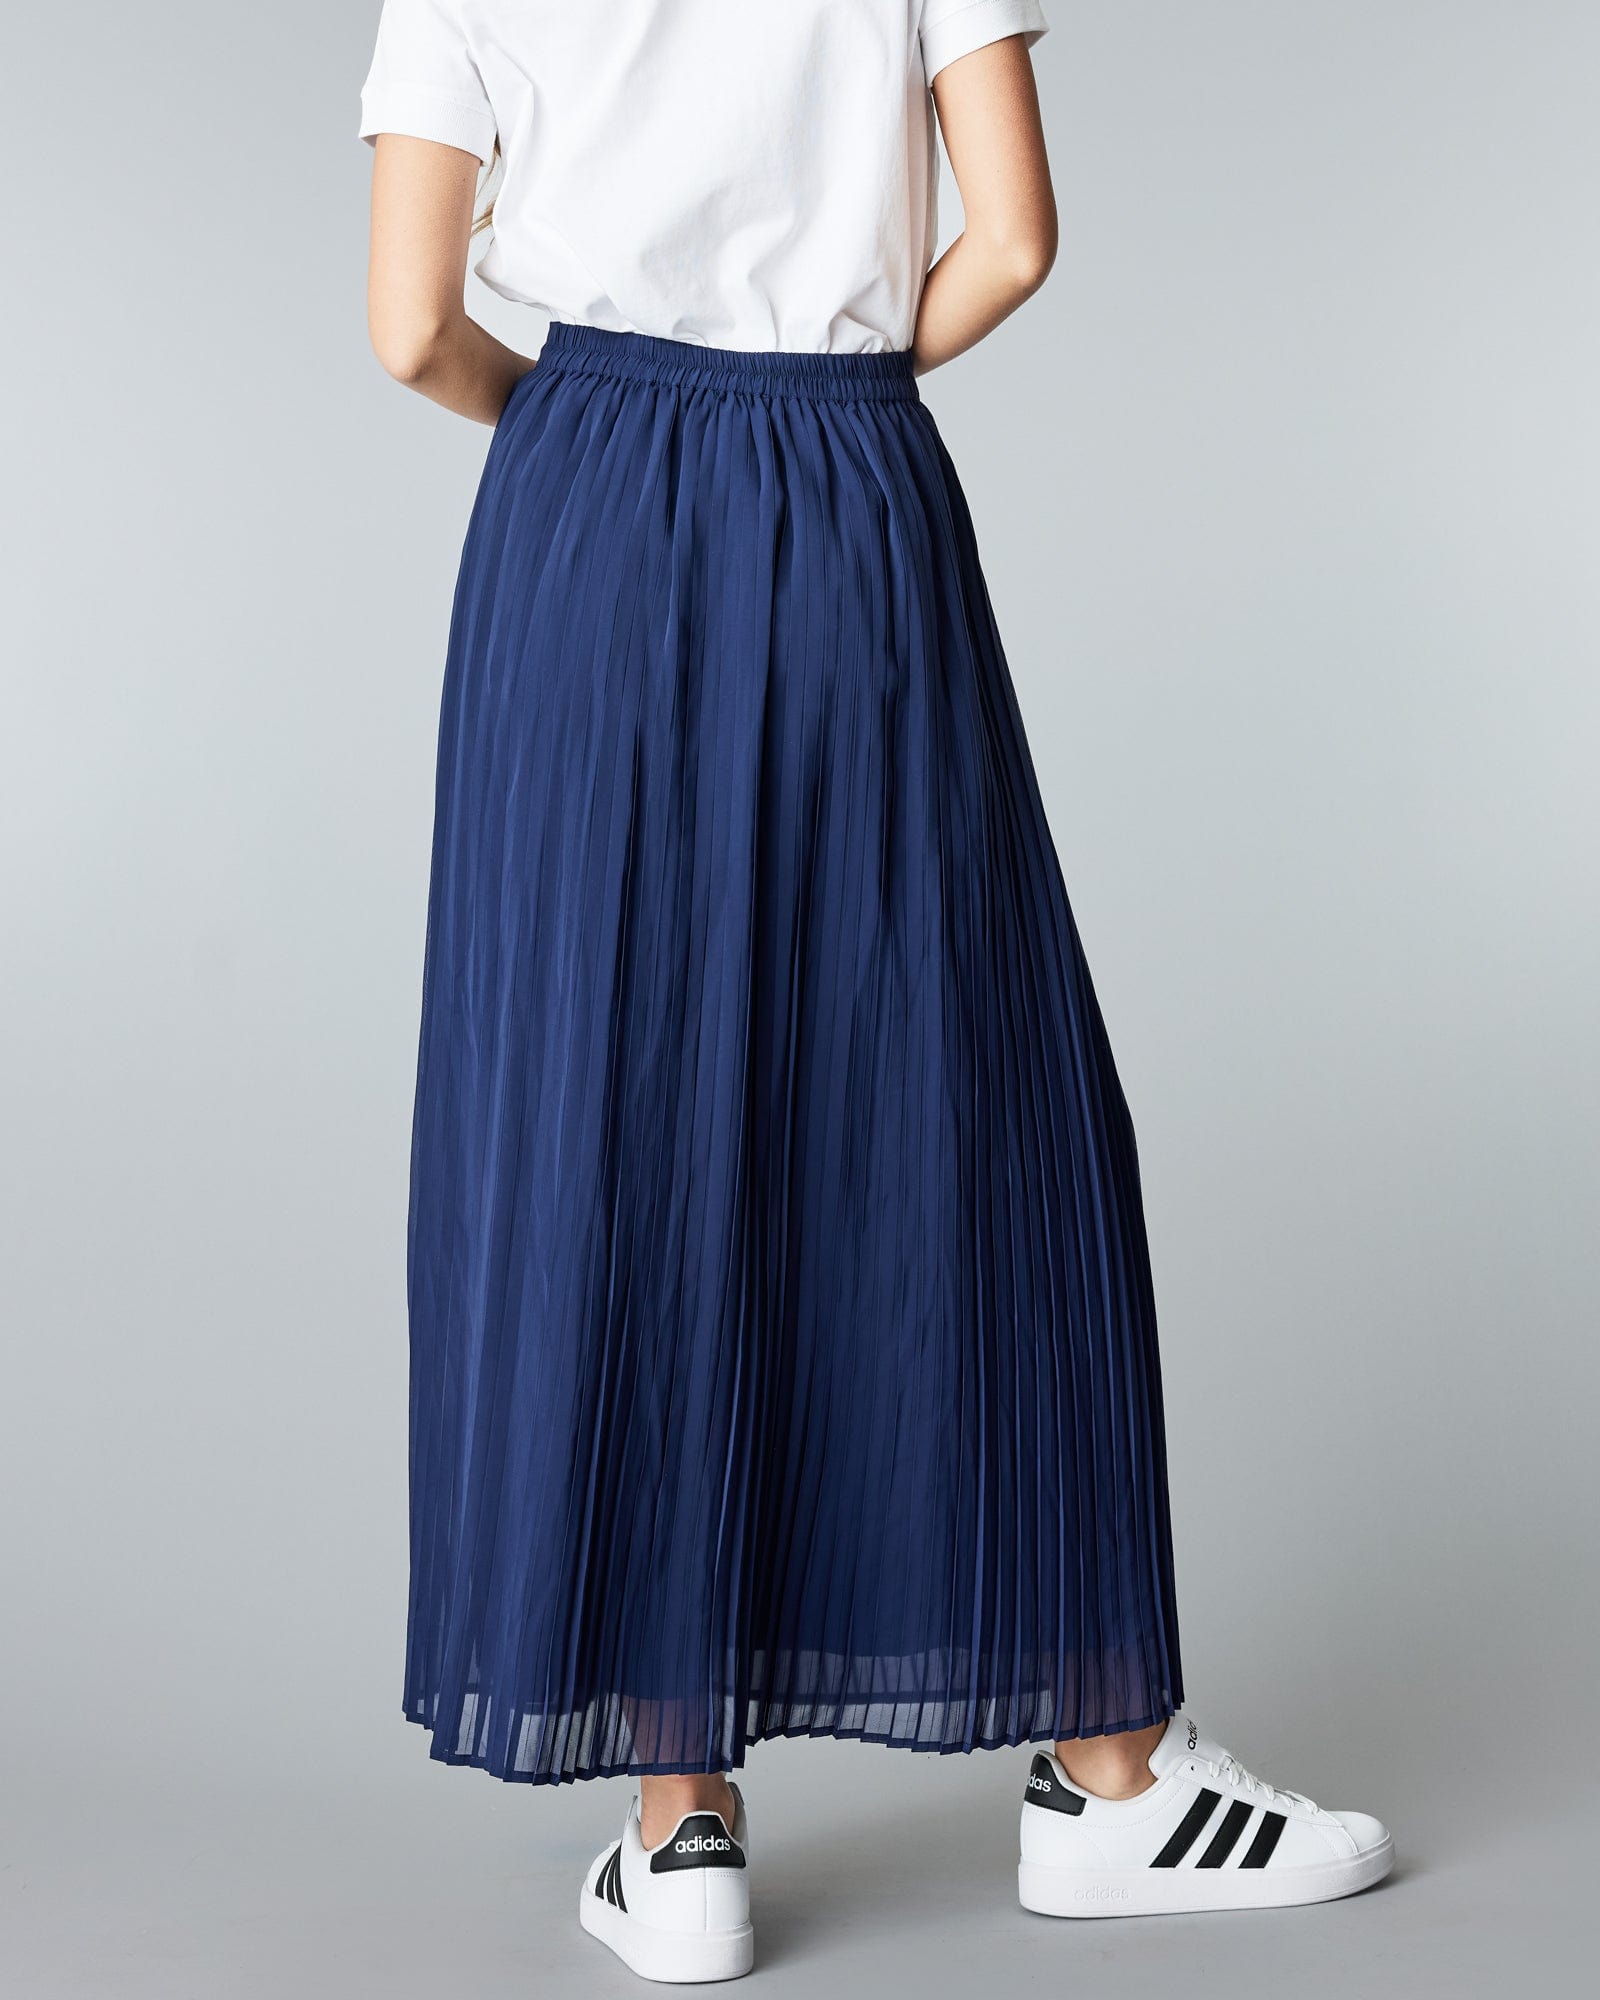 Woman in a maxi length, navy, pleated skirt